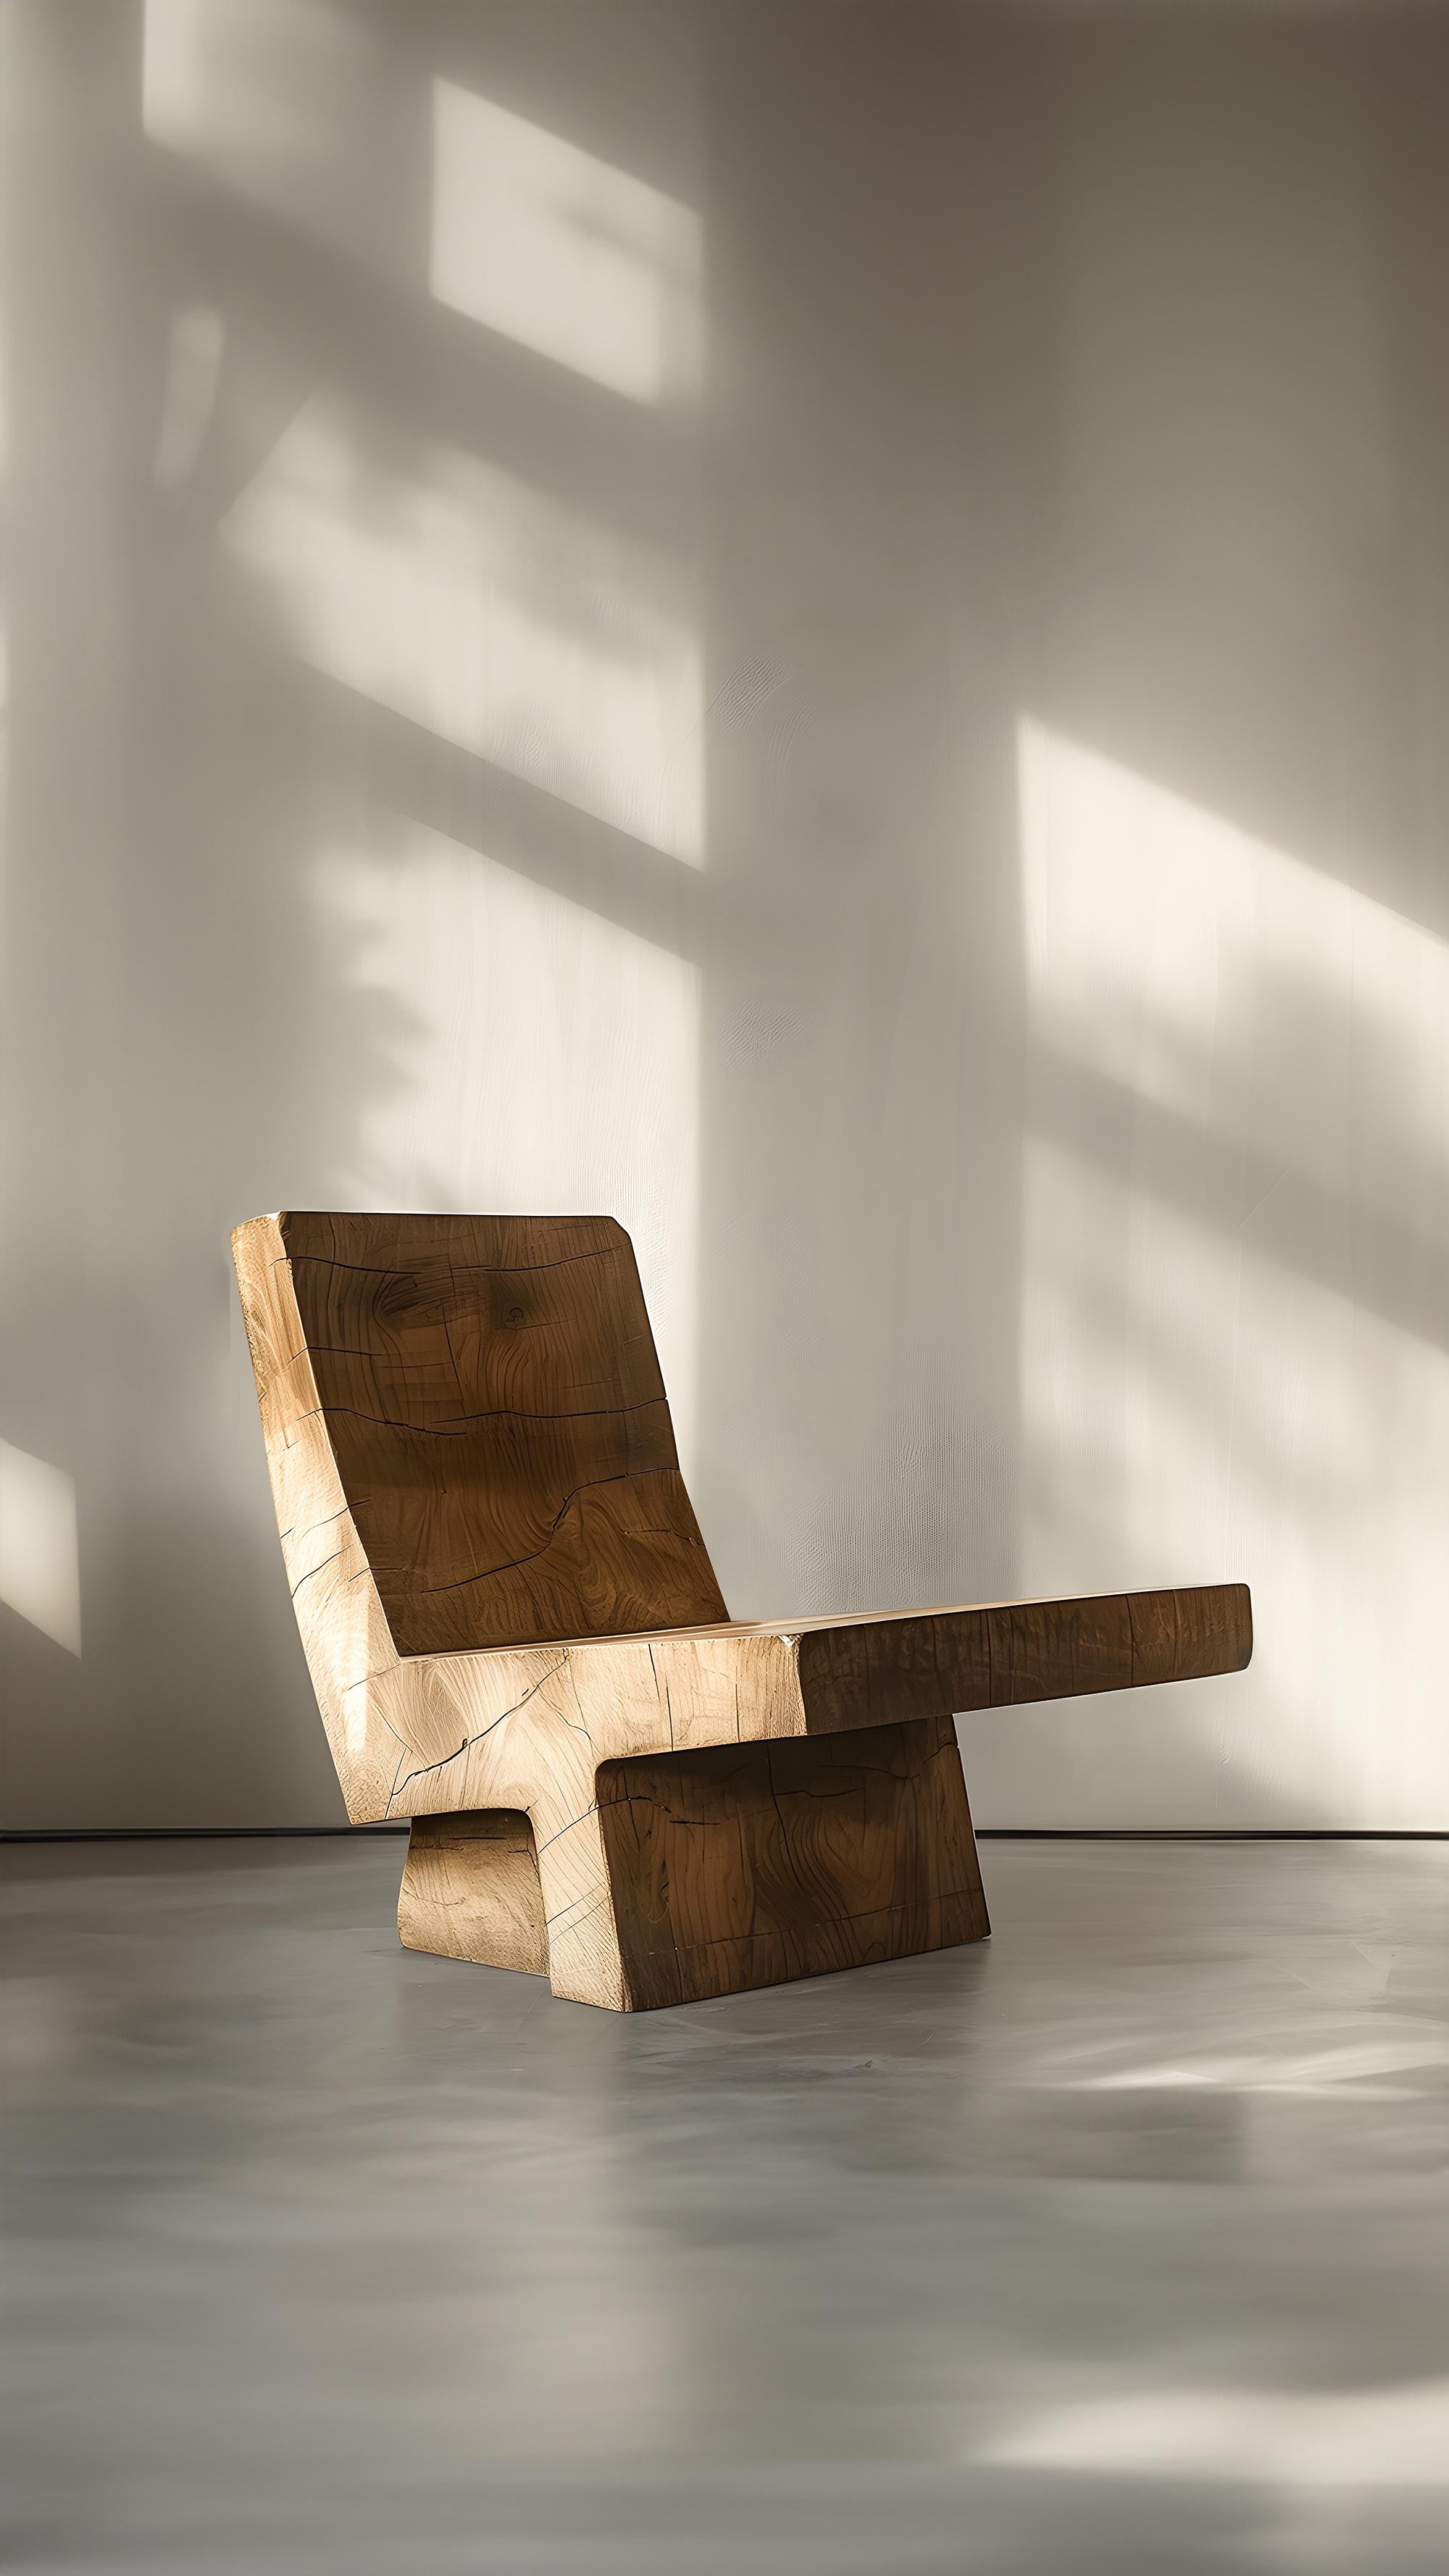 Contemporary Solid Wood Chair Minimalist Design Muted by Joel Escalona No15 For Sale